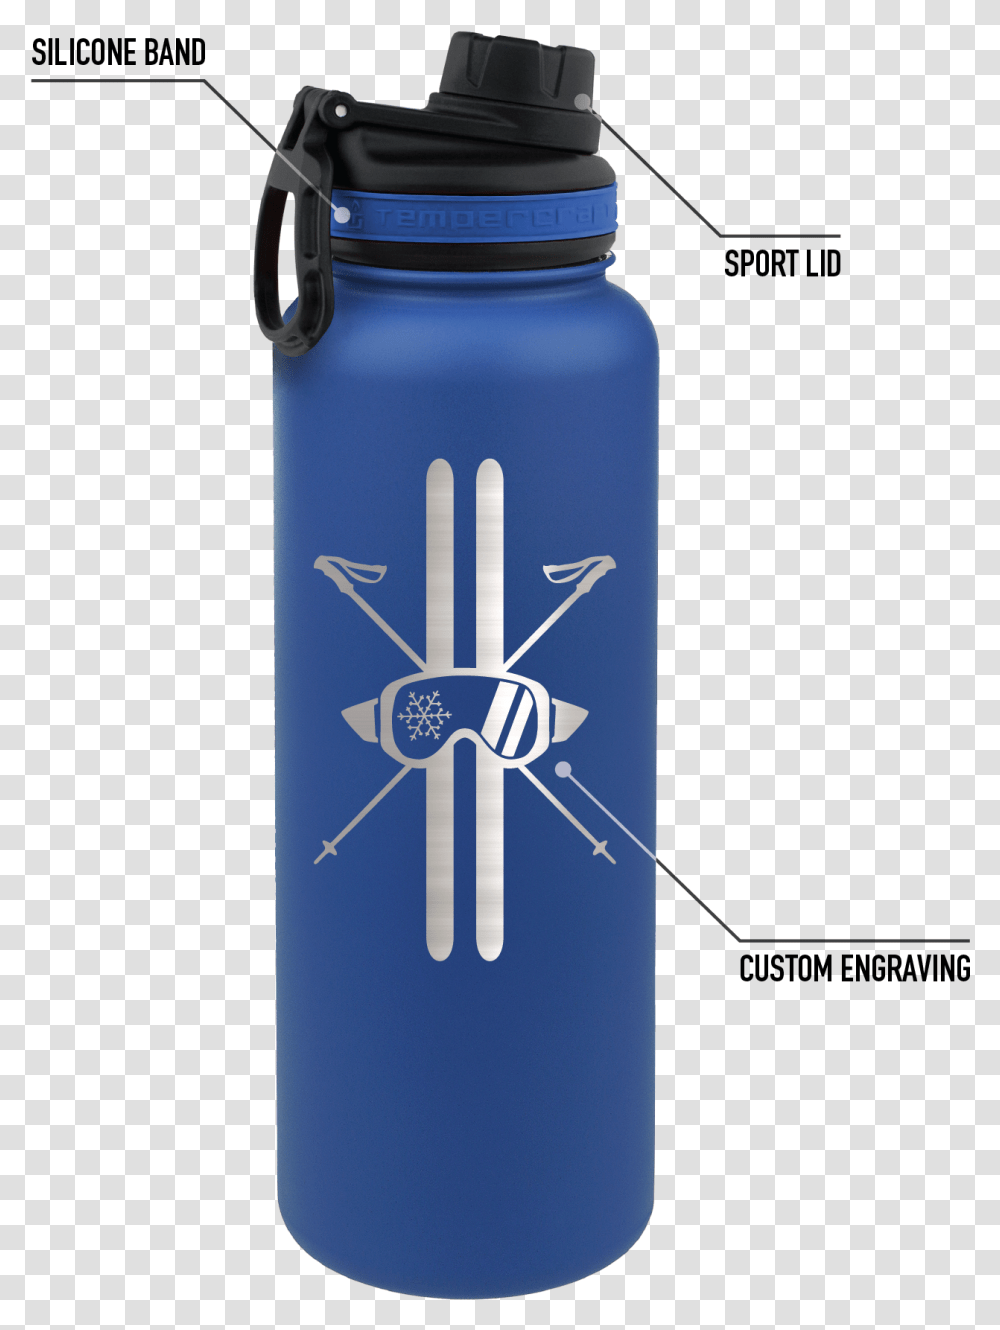 TempercraftClass Lazyload Lazyload Fade In Cloudzoom Water Bottle, Shaker Transparent Png